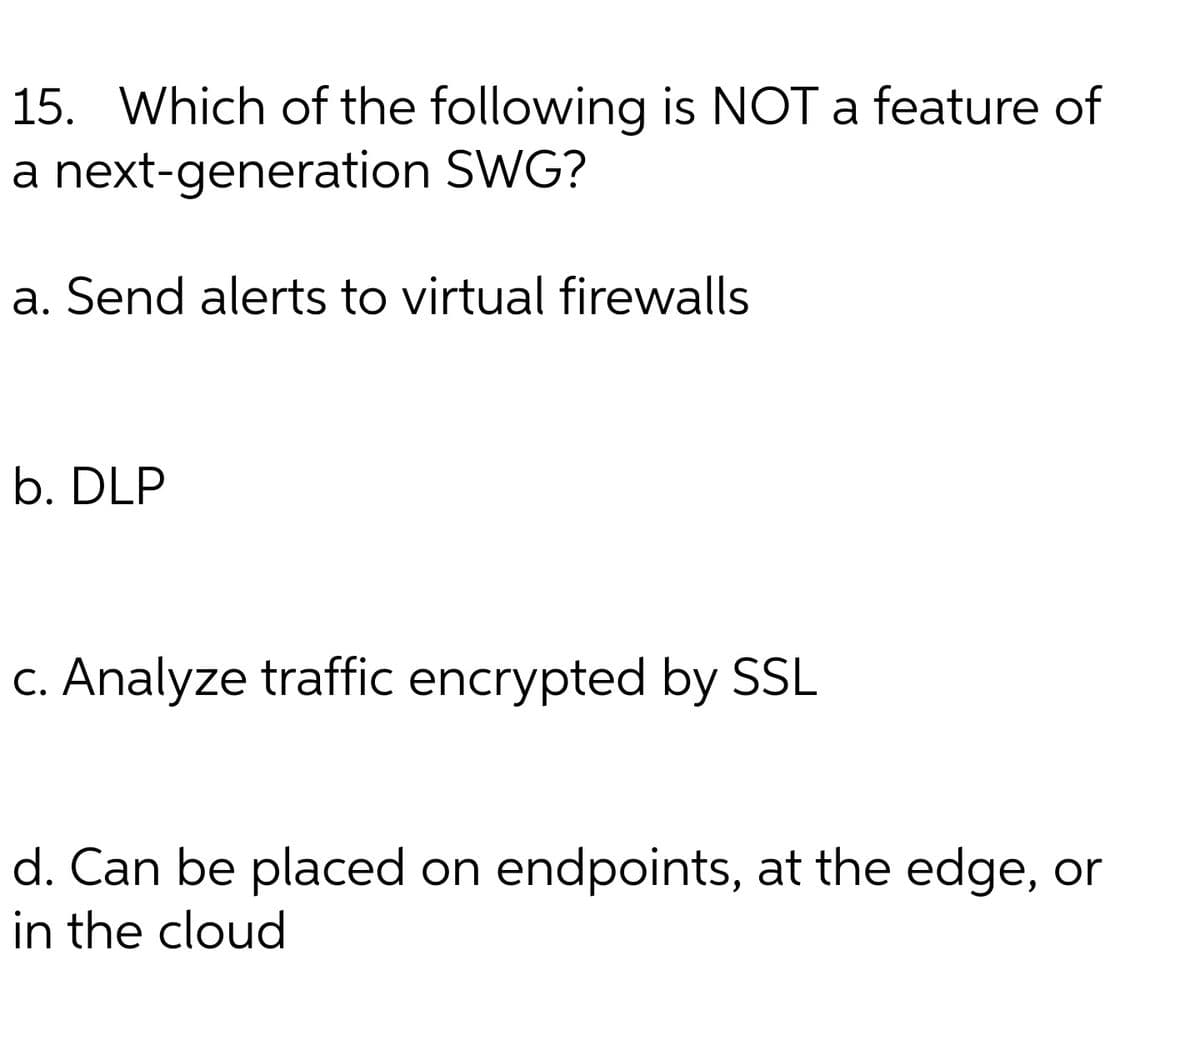 15. Which of the following is NOT a feature of
a next-generation SWG?
a. Send alerts to virtual firewalls
b. DLP
C. Analyze traffic encrypted by SL
d. Can be placed on endpoints, at the edge, or
in the cloud
